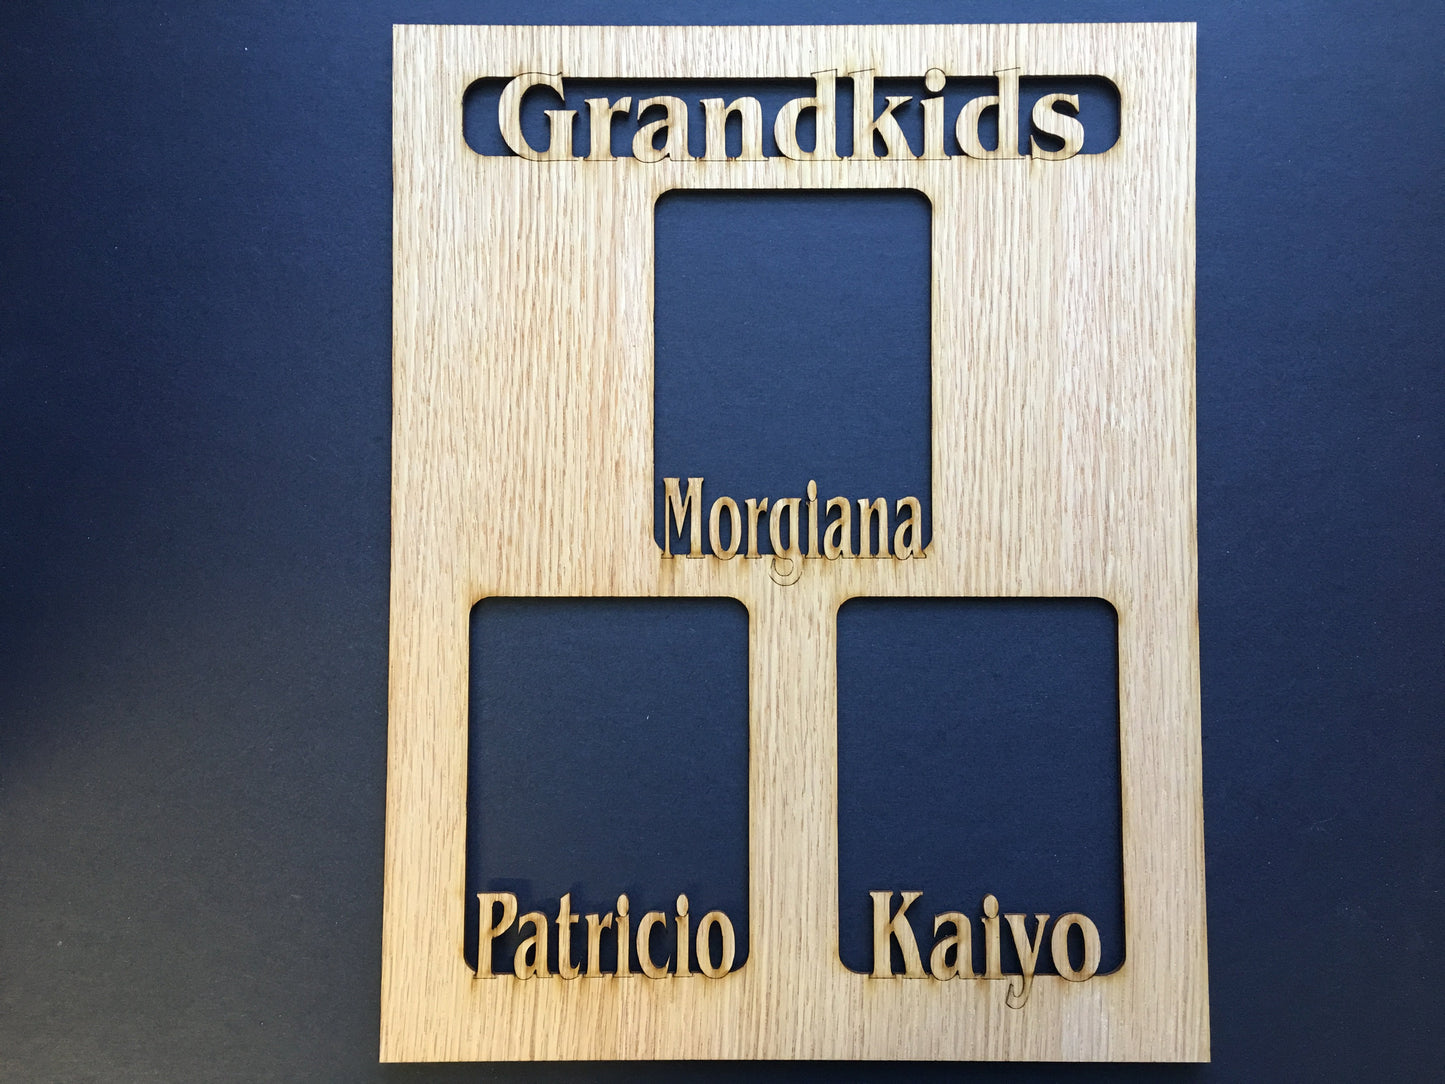 Grandkids Name Picture Frame 11"x14"